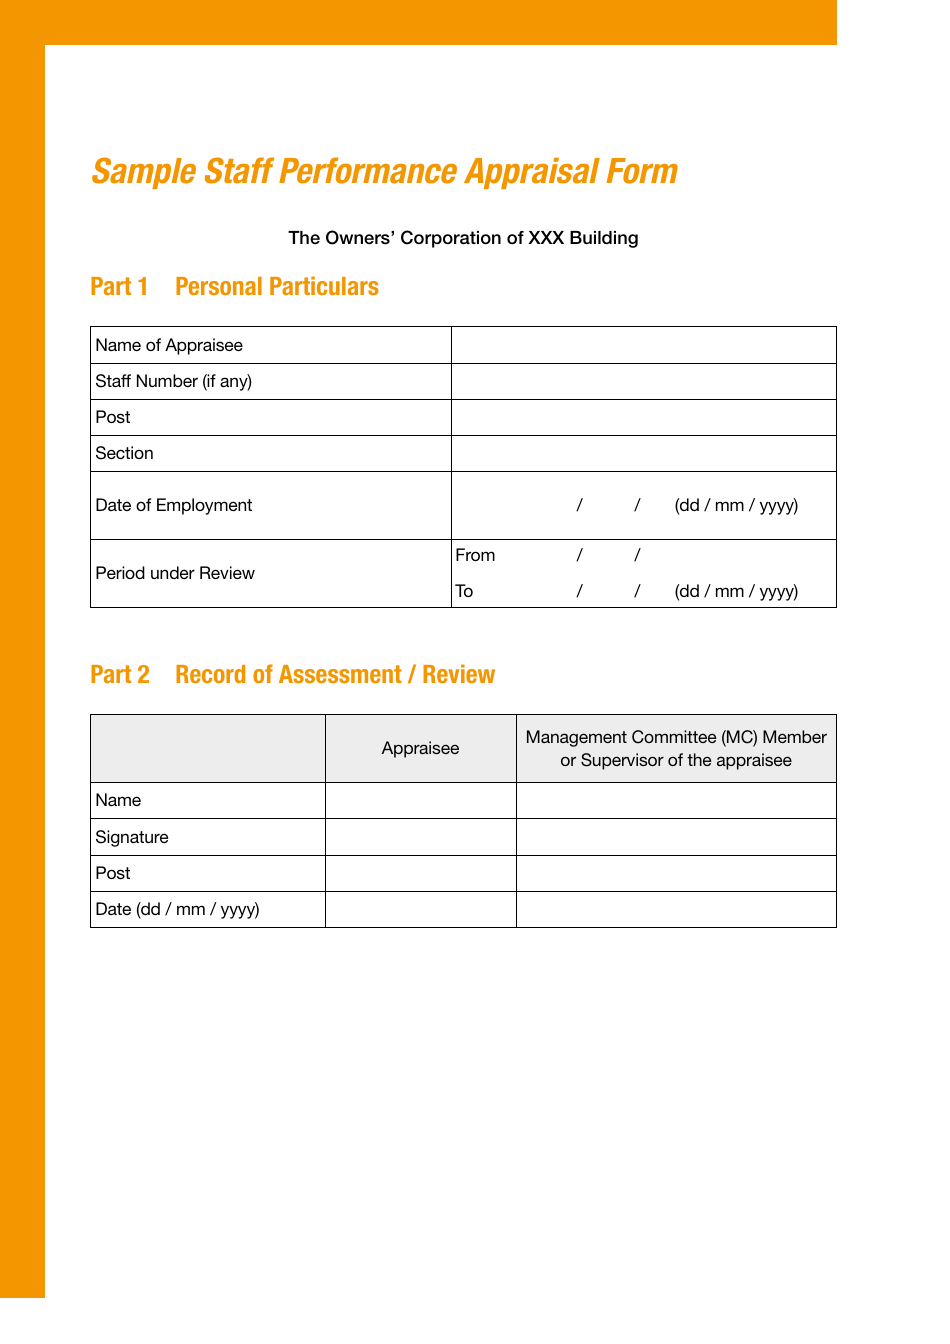 Sample Staff Performance Appraisal Form, Page 1